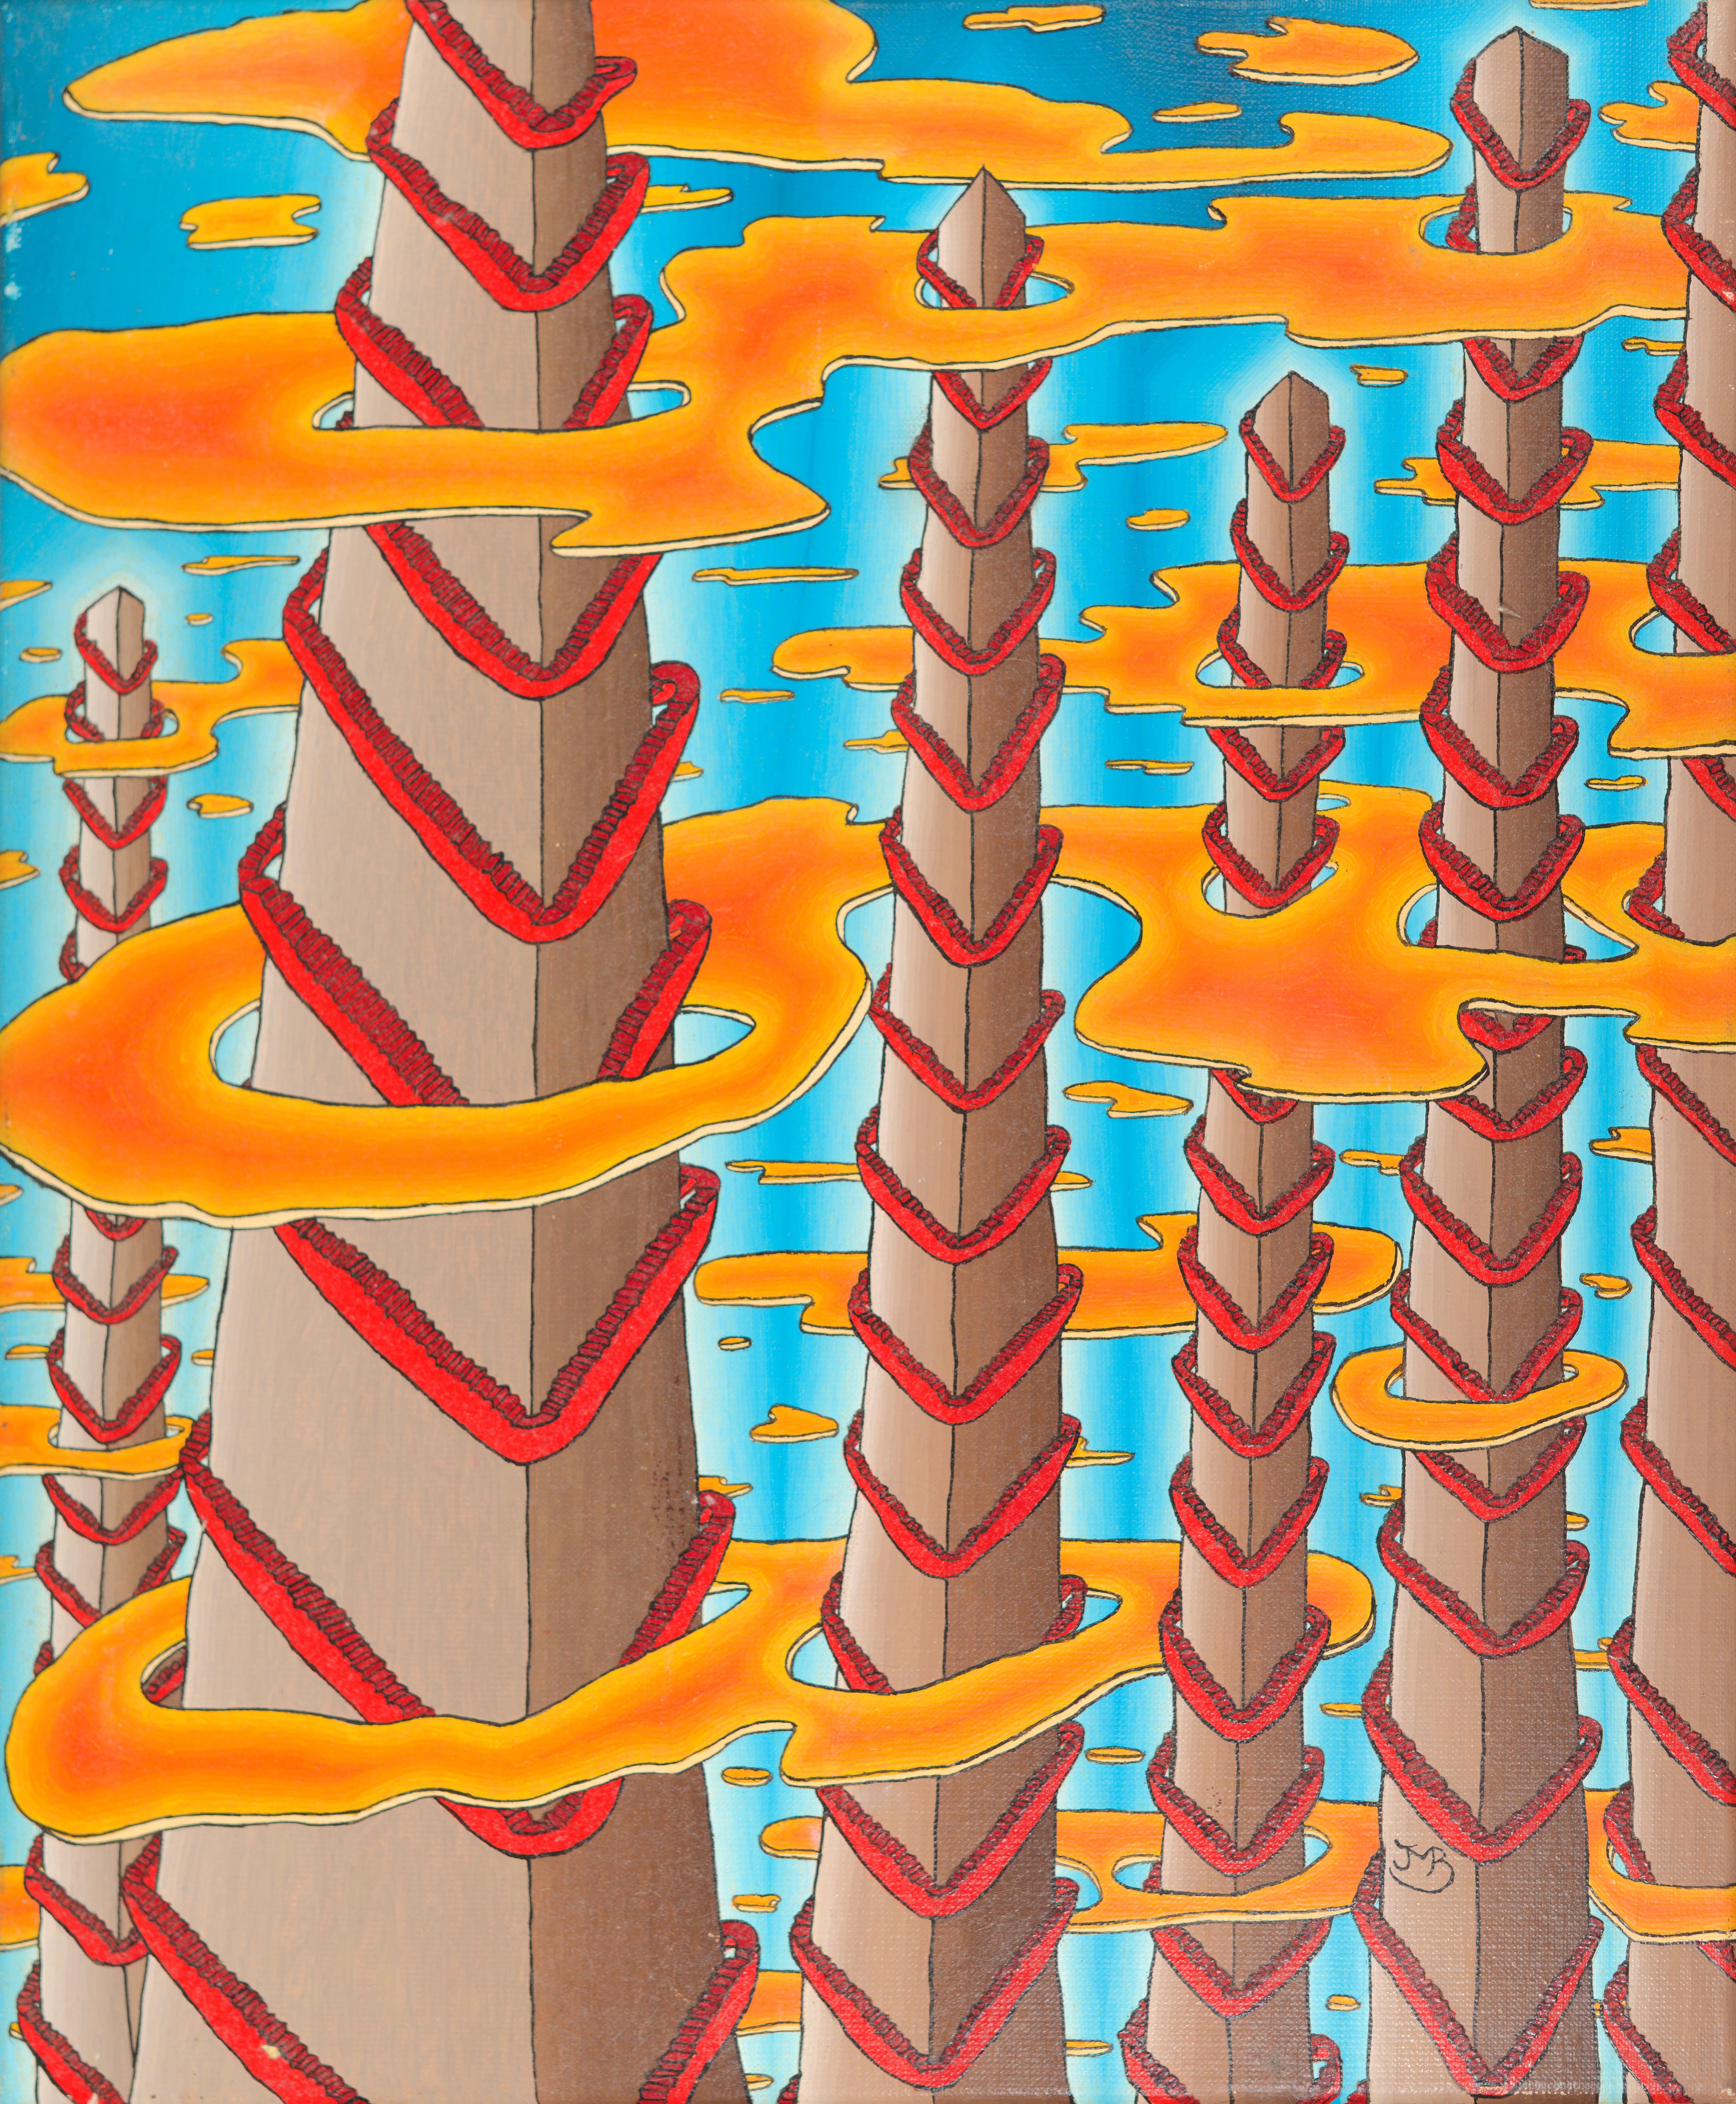 High Pyramidal Towers with Red Stairs and Orange Clouds on Blue Sky Oil Painting